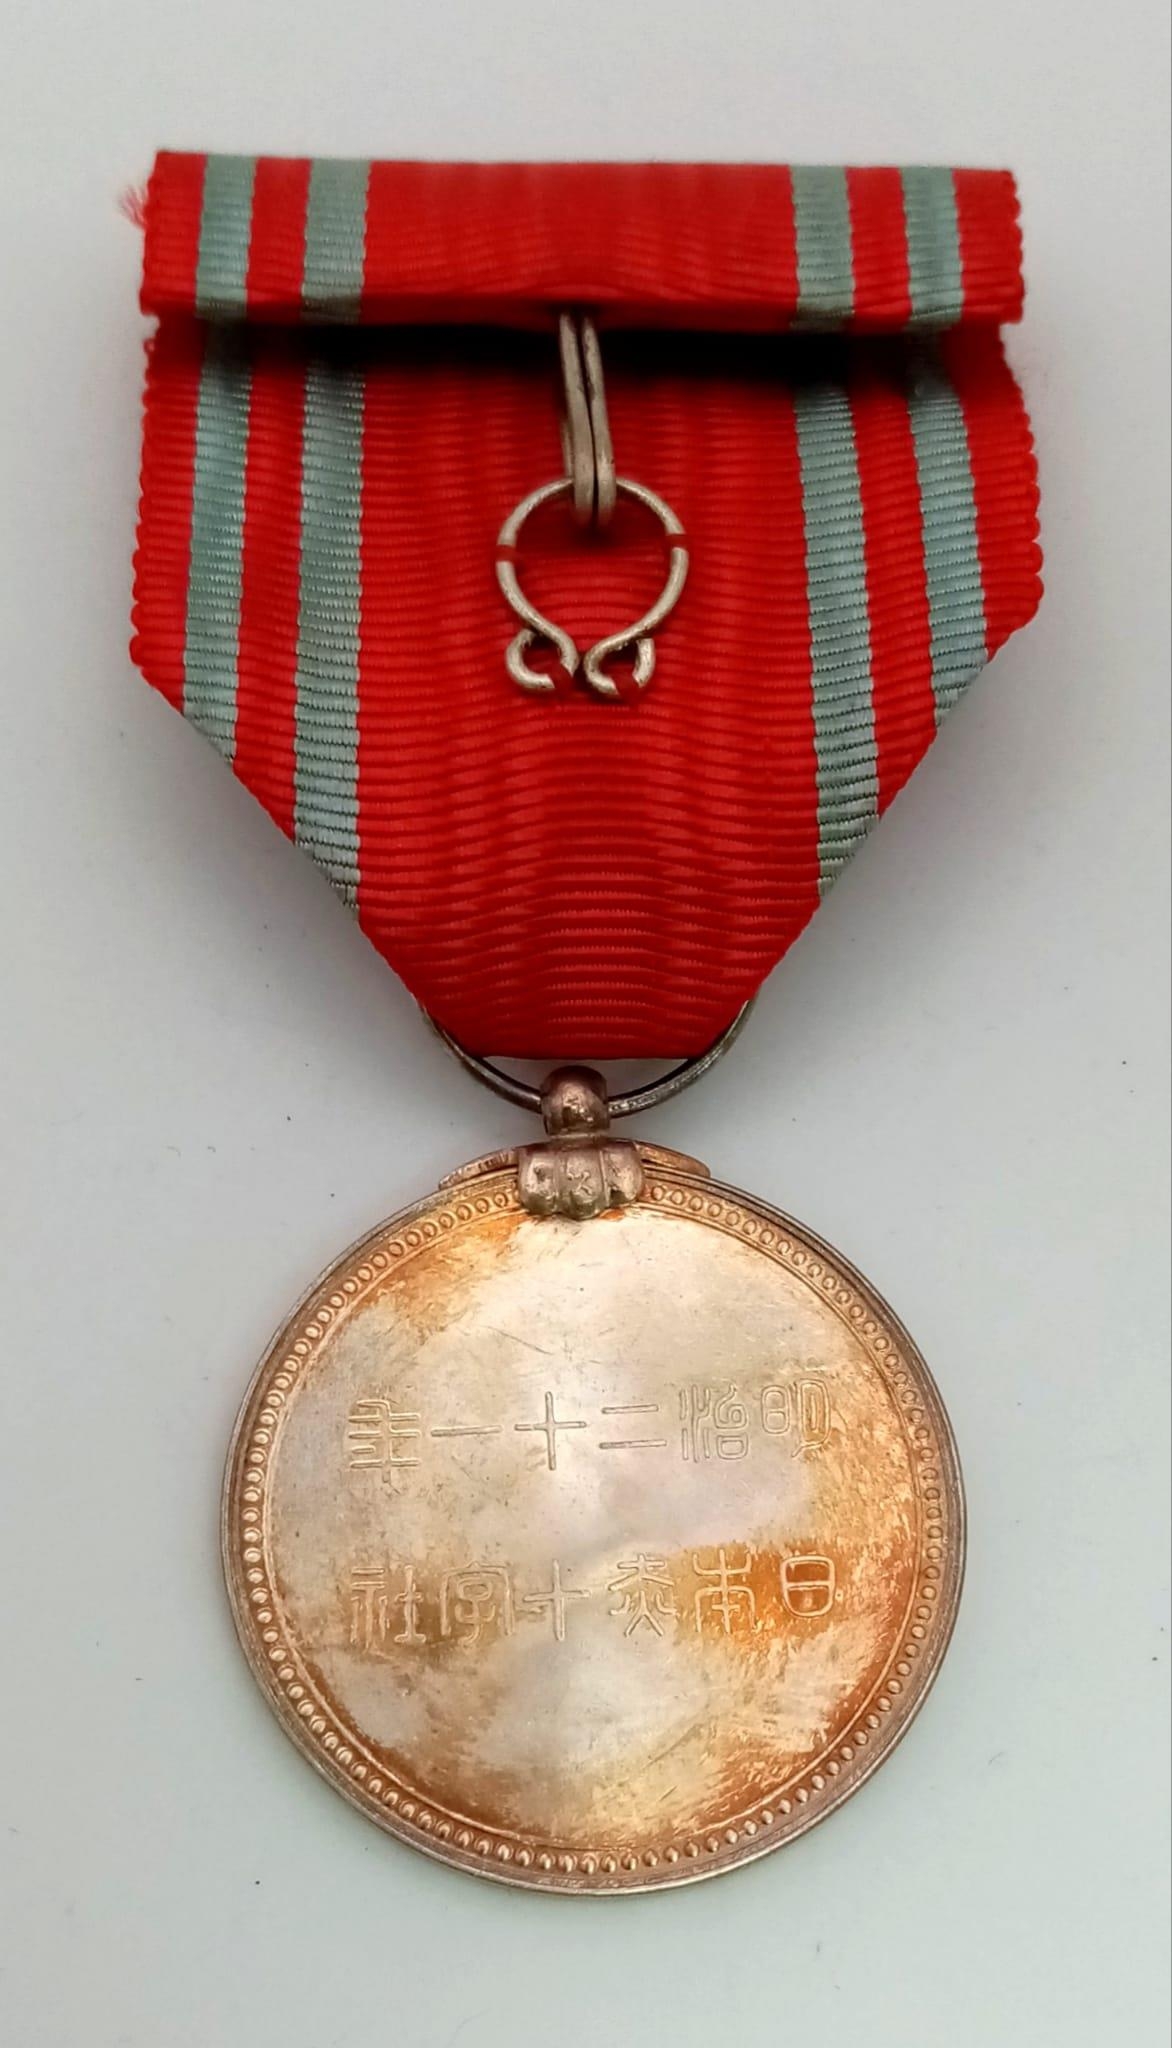 Japanese WW2 Red Cross Order Medal with Rosette, comes in Original Presentation Box.